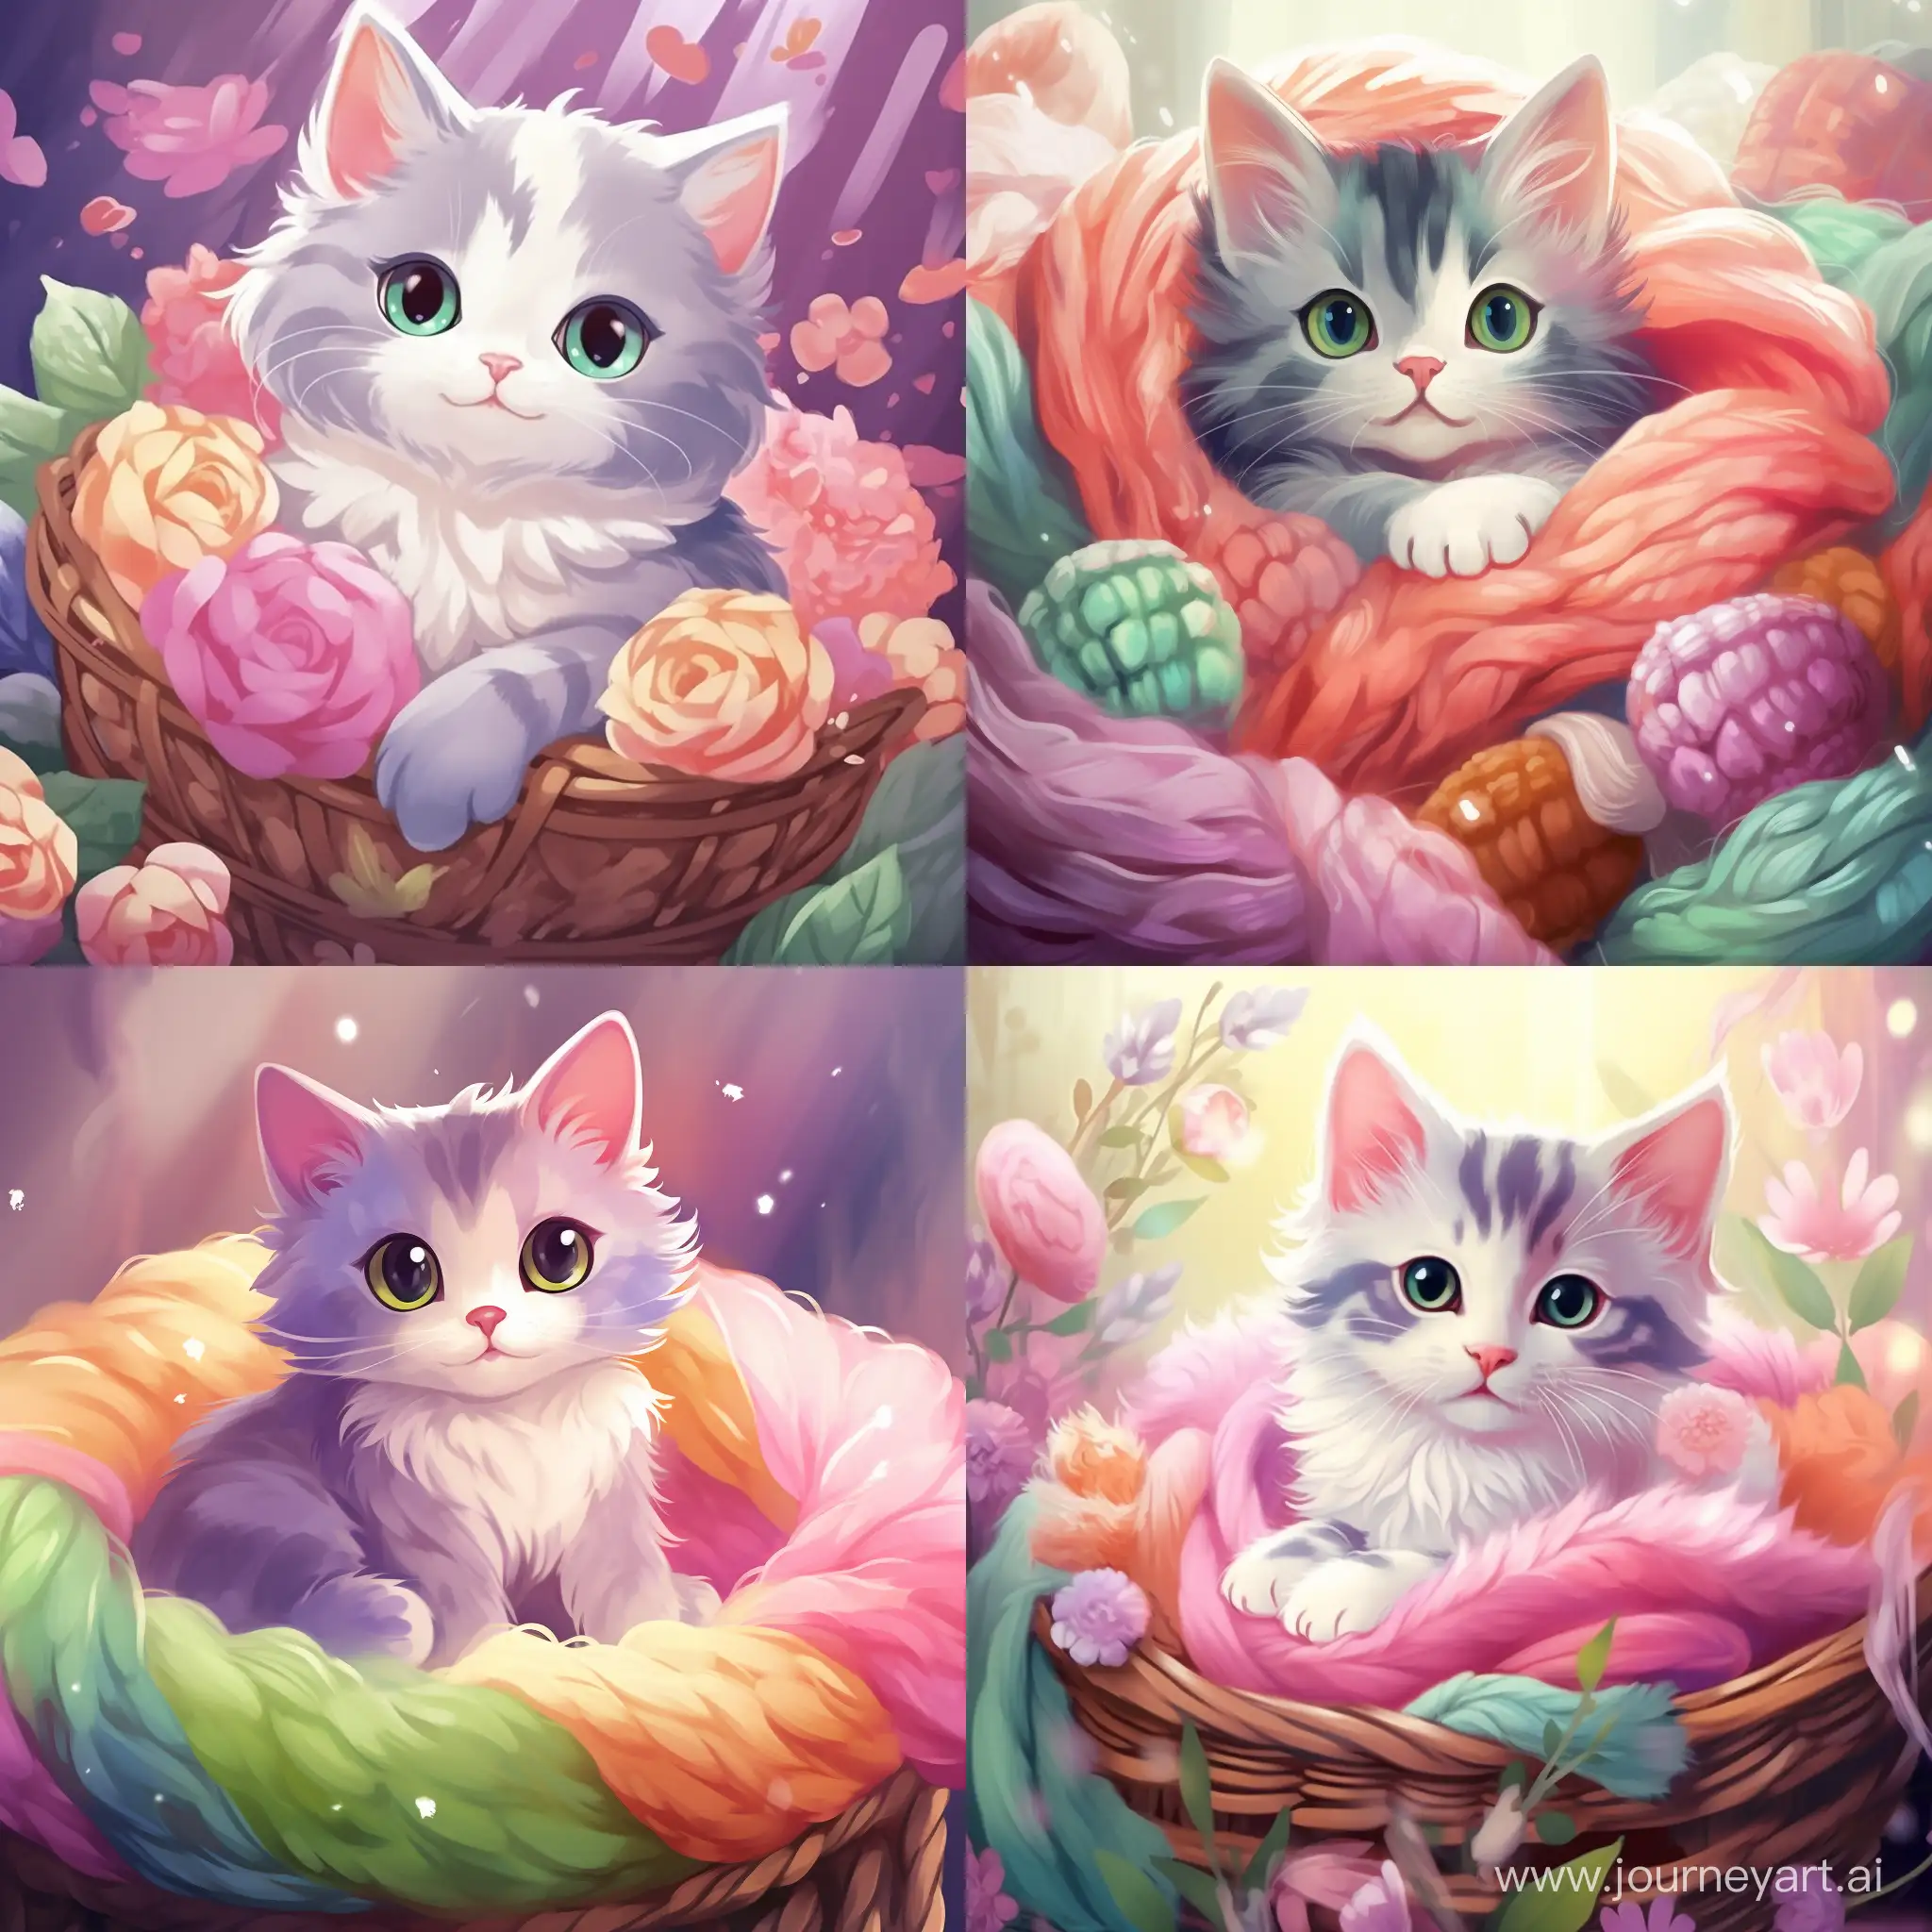 "Generate an adorable image of a tiny, fluffy kitten with bright, round eyes, sitting playfully in a cozy basket surrounded by soft blankets. Ensure the setting is warm and inviting, and the kitten has a curious and innocent expression that instantly melts hearts. The color palette should be gentle, featuring pastel tones that accentuate the cuteness of the scene. Bonus points for incorporating subtle rays of sunlight to add a touch of warmth to the overall composition."
